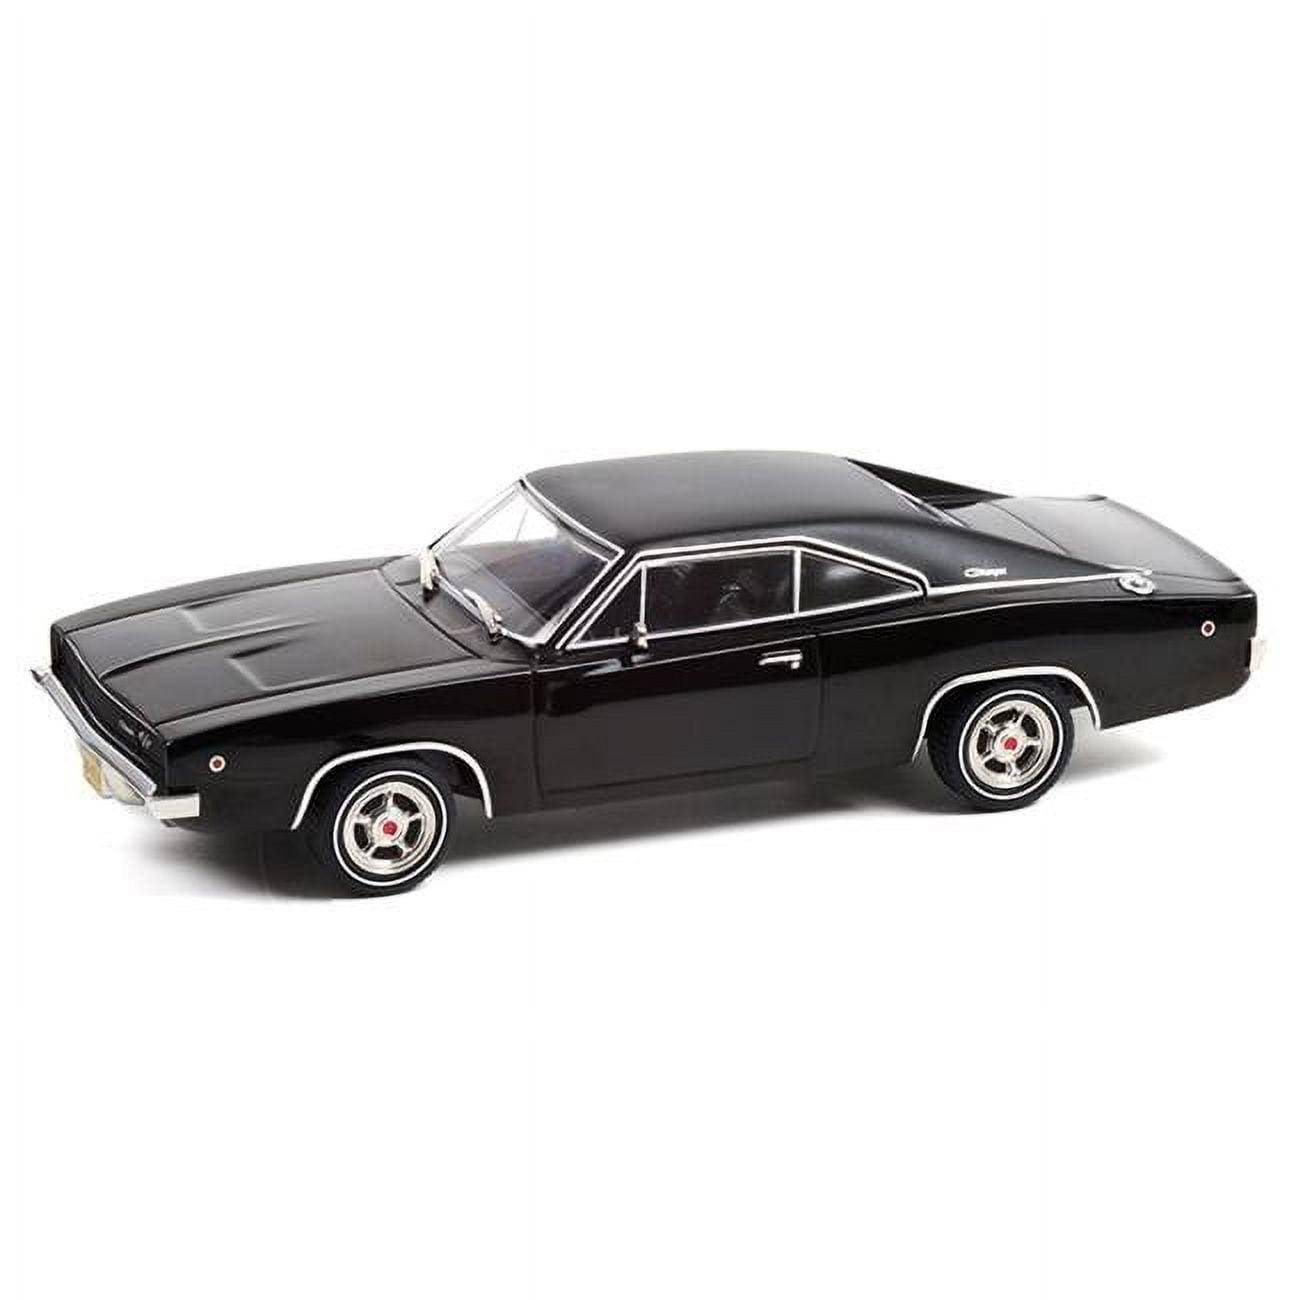 GRE86608 1-43 Scale Model Toy Car for 1968 Dodge Charger RT John Wick -  GreenLight